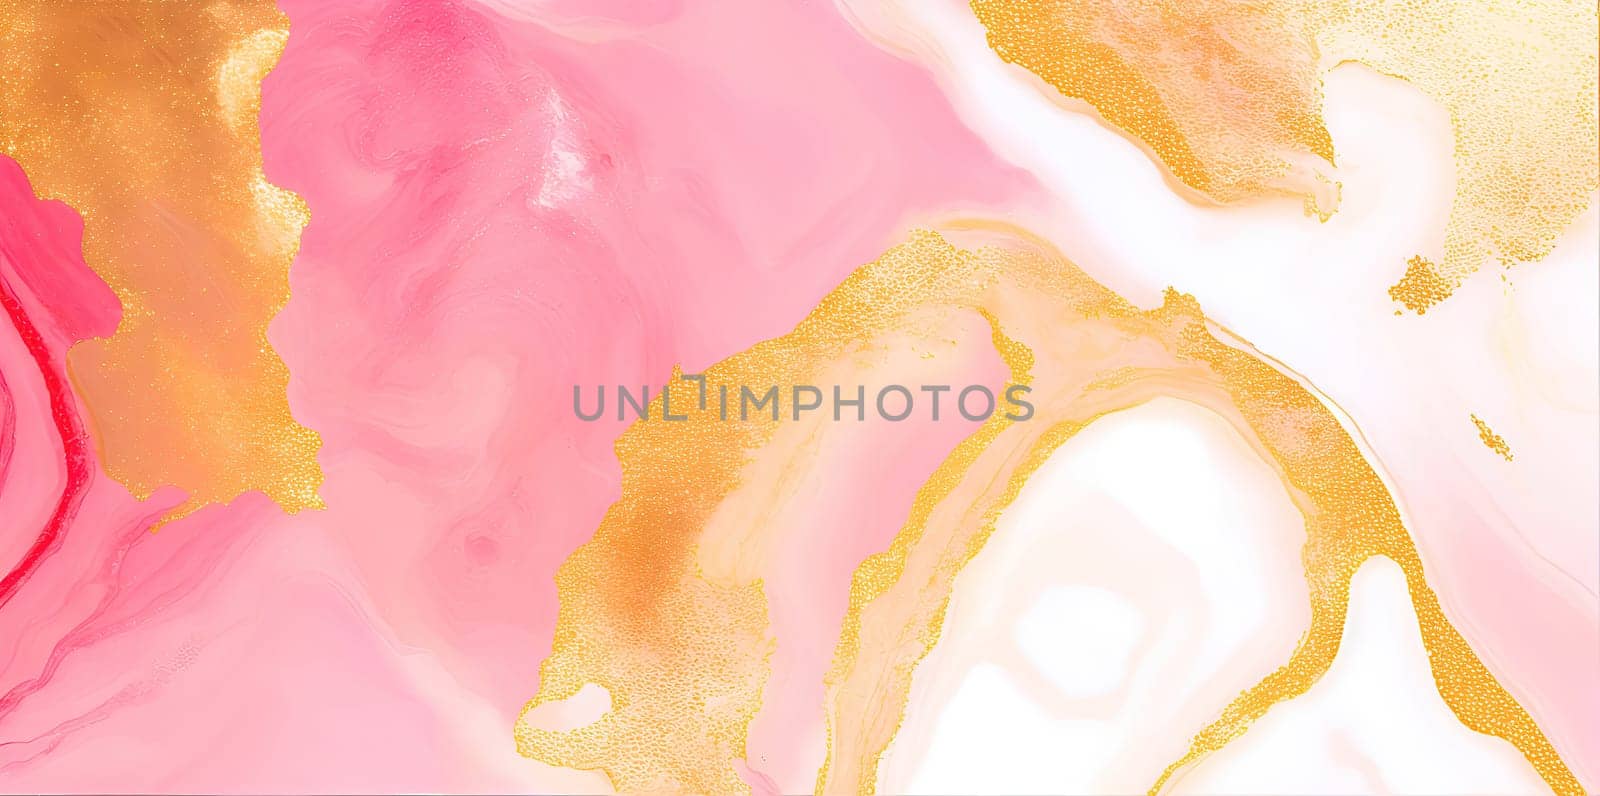 Fluid marble texture, colourful abstract paint, mix colors, abstract background. Soft focus.